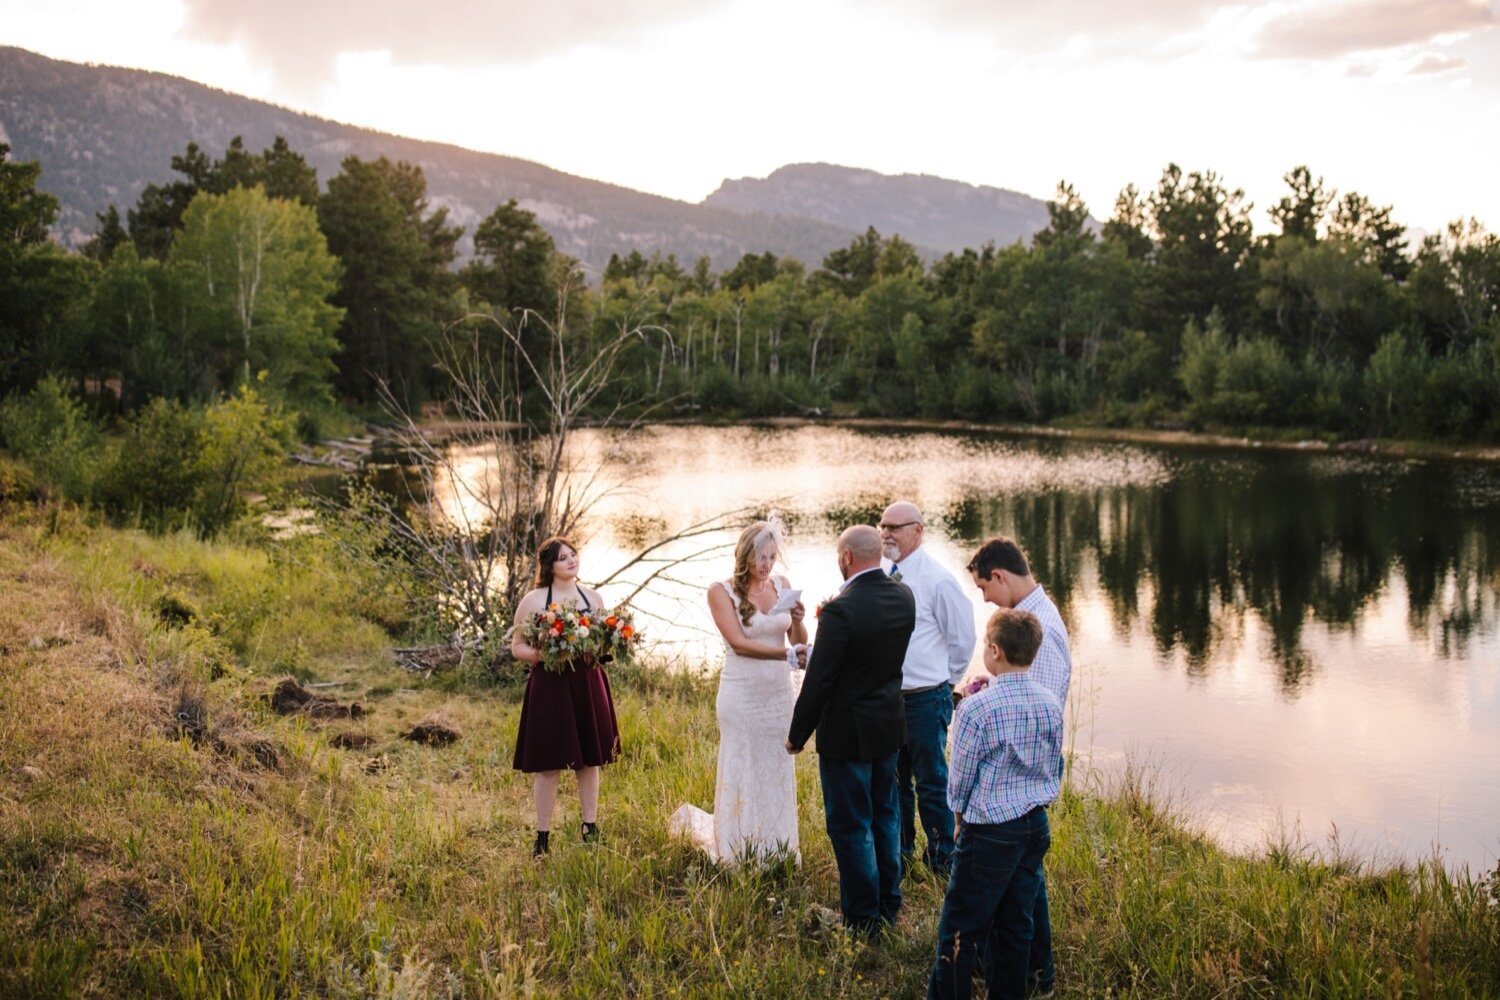  Estes Park Wedding Planner, Cheley Lodge and Grove, Cheley Colorado Camps, Colorado Wedding, Colorado Elopement, Wedding Planning, Wedding Inspiration, Wedding ideas, Elopement Planning, Elopement Inspiration, Elopement ideas, Small Wedding, Intimat